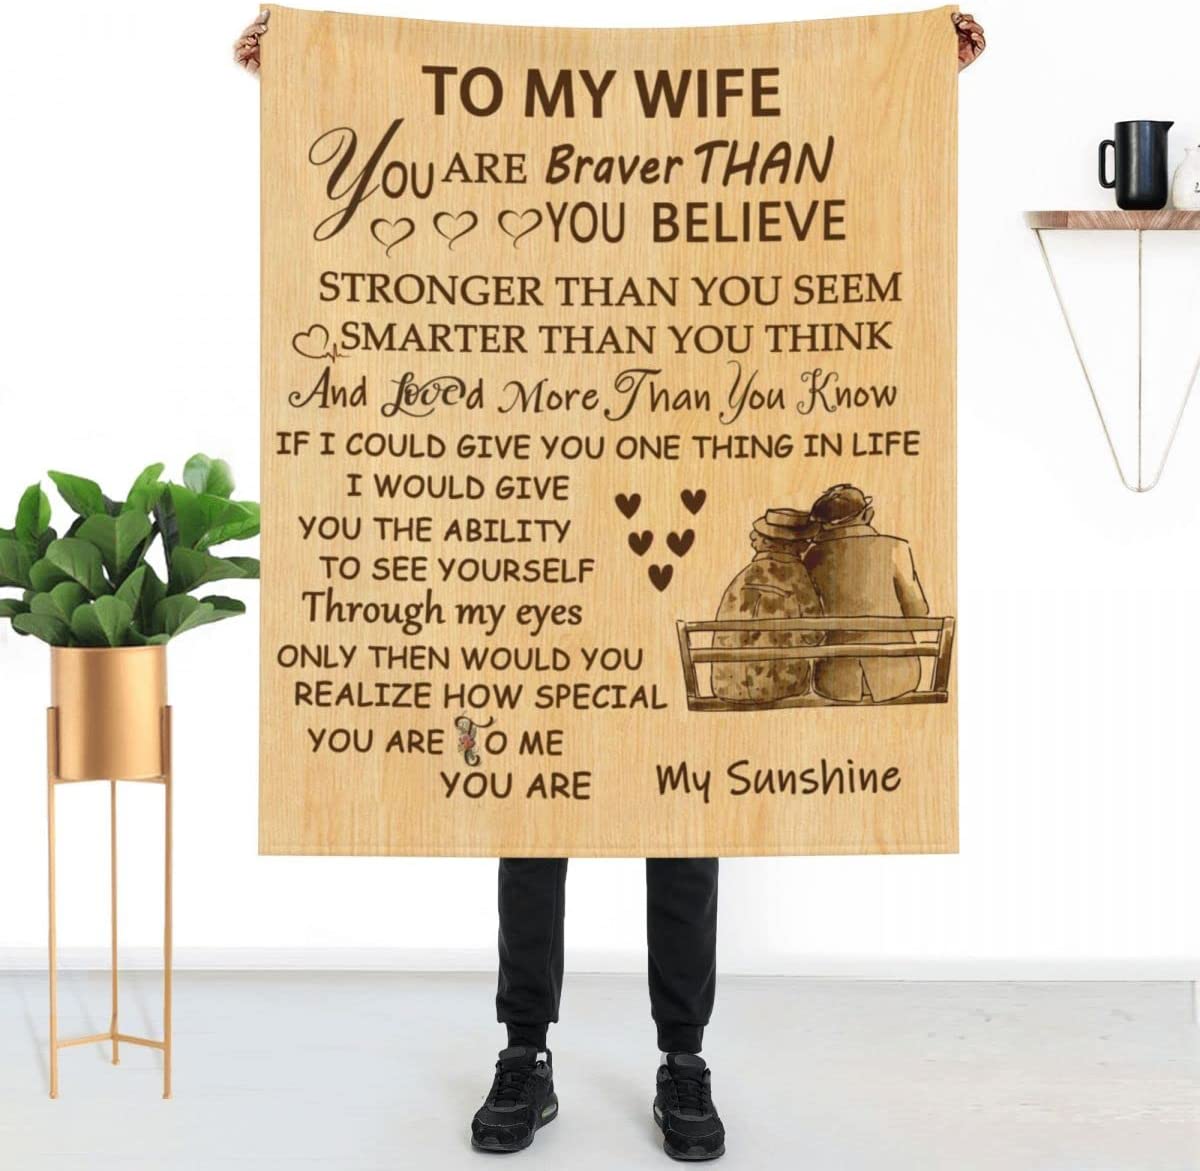 To My Wife Blanket from Husband, Romantic Gifts for Her, Super Soft Throw Blanket for Her, Wife Gifts from Husband, Best Gift Ideas For Wife